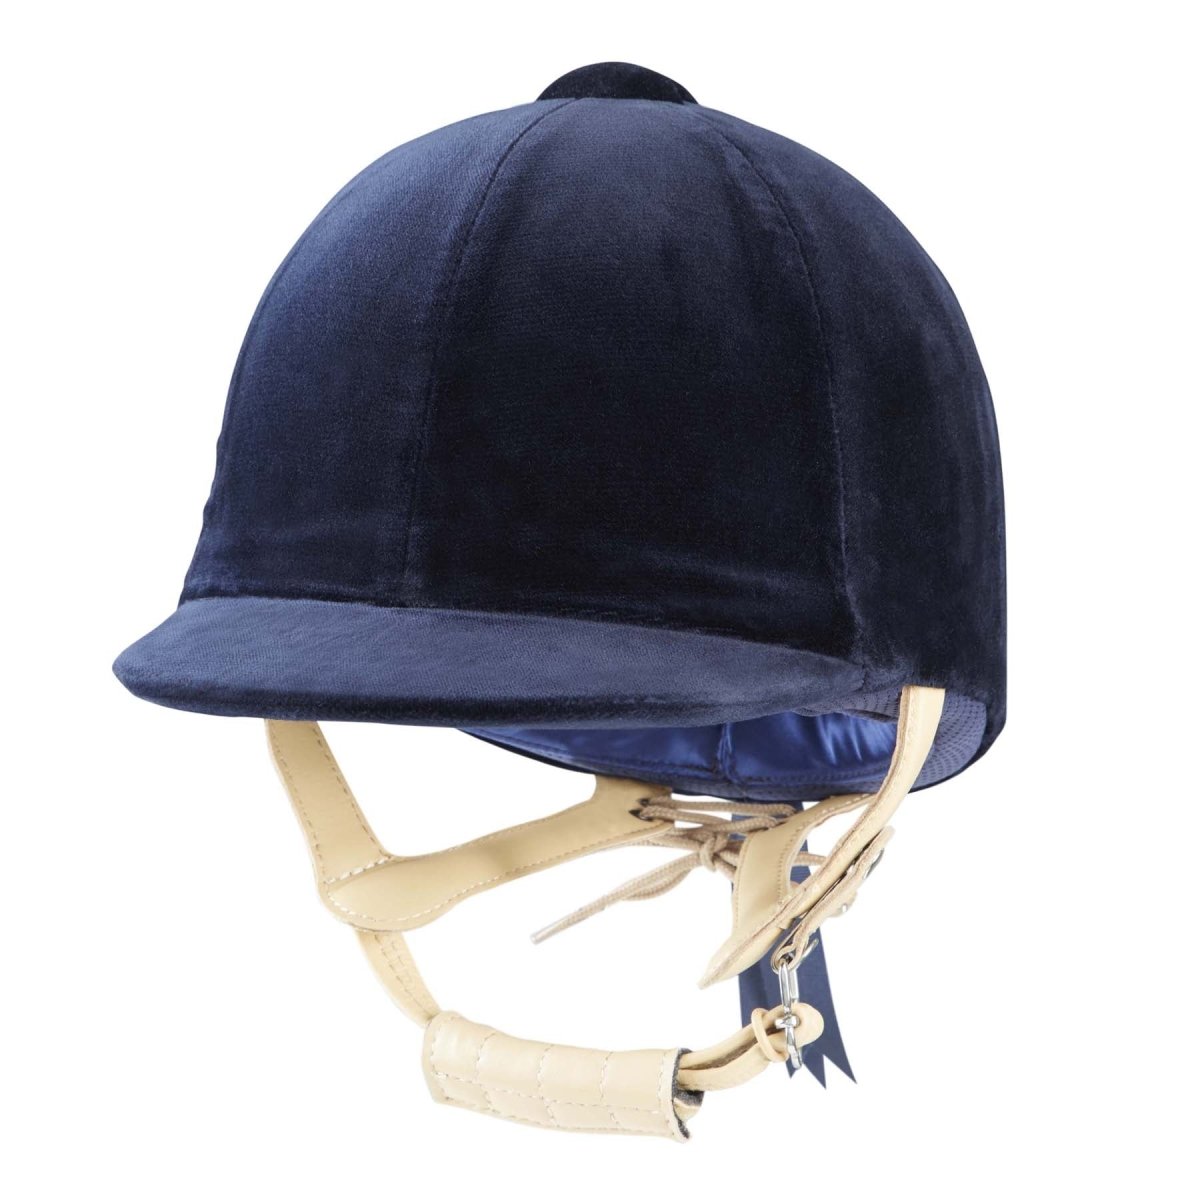 Champion CPX Showmaster Peaked Helmet - Navy - 55cm